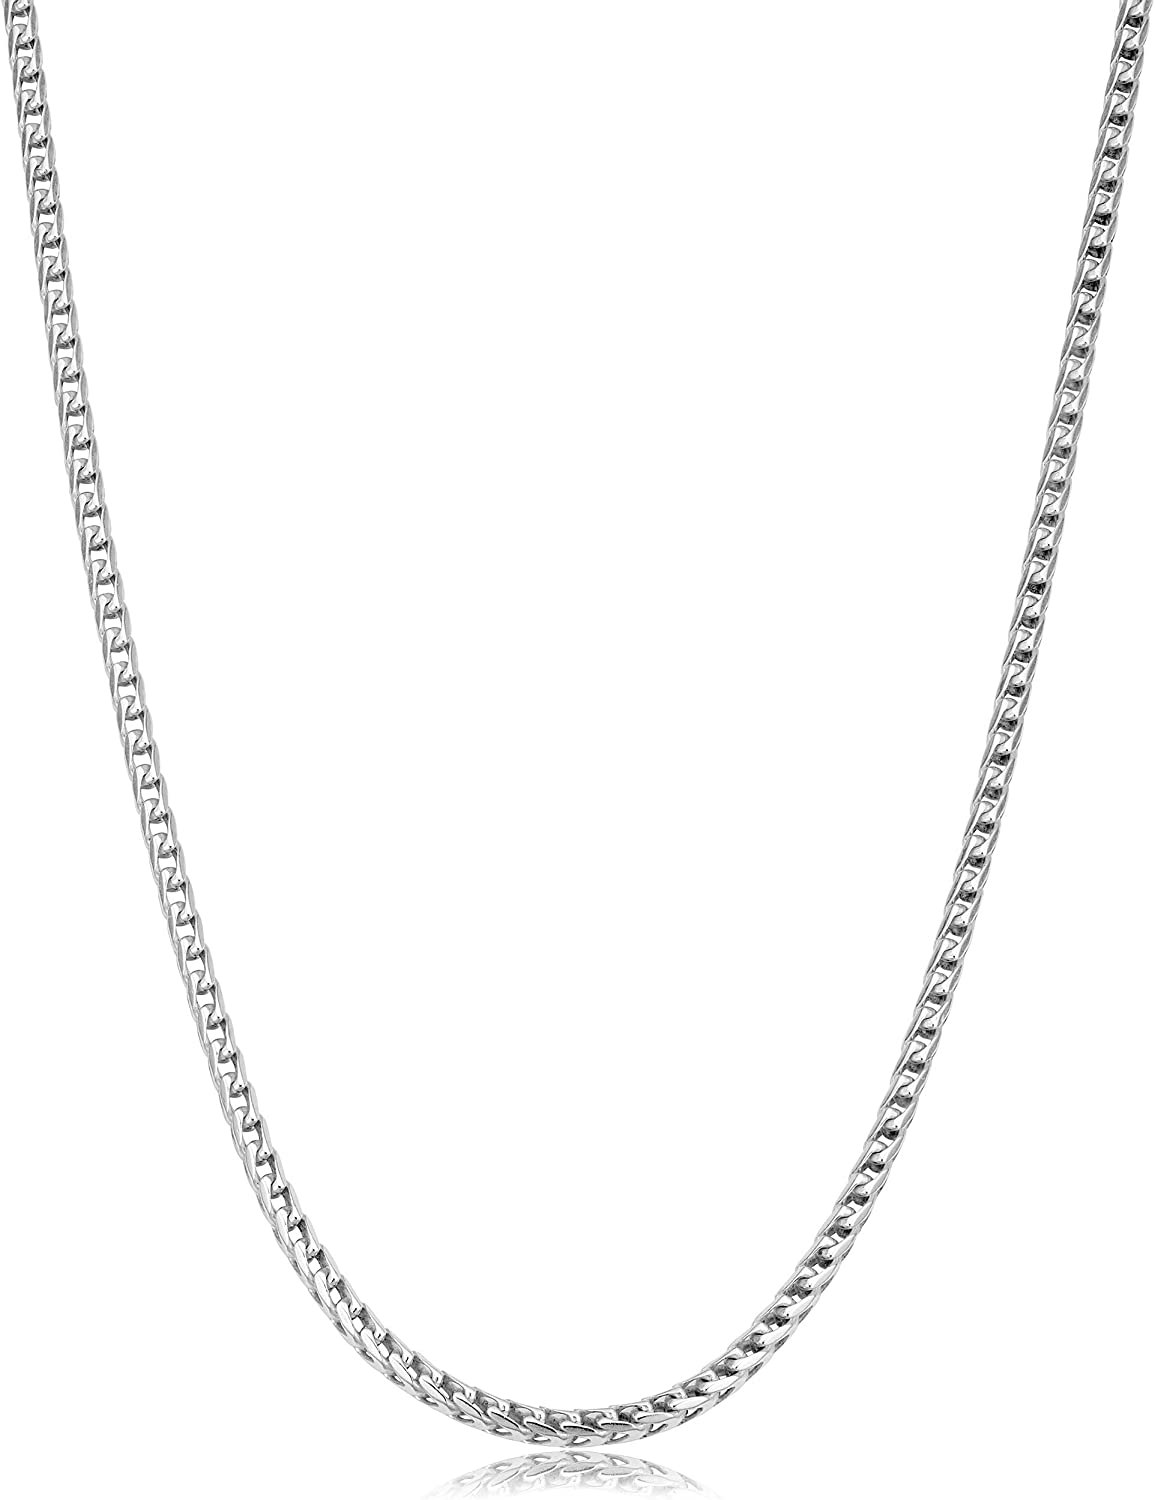 Sterling Silver 2.5MM-5MM Solid Franco Chain Necklace, Square Box Link Chain, Rhodium Necklace, Sterling Silver Necklace 18-30